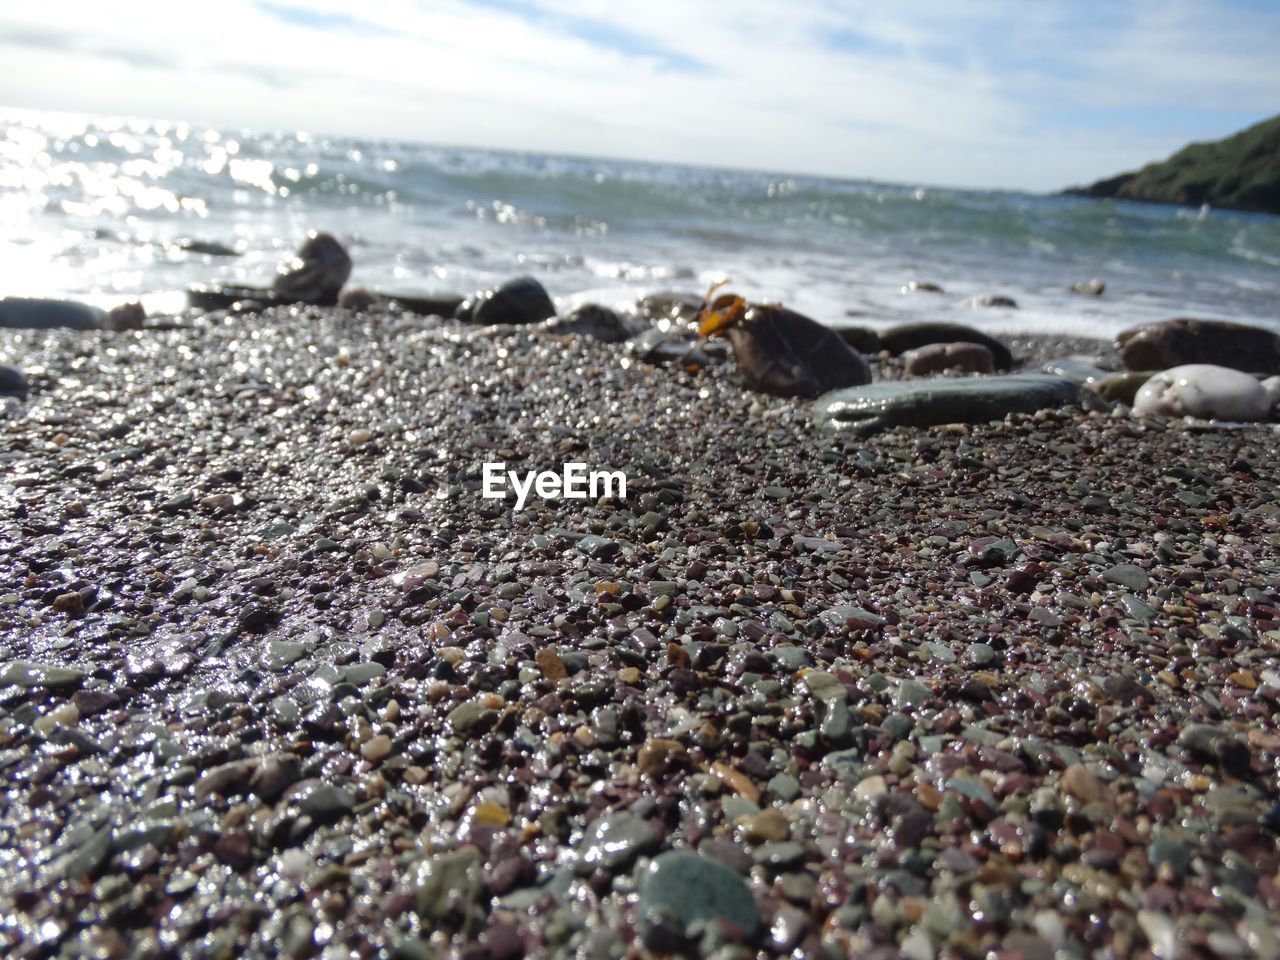 SURFACE LEVEL OF PEBBLES ON SHORE